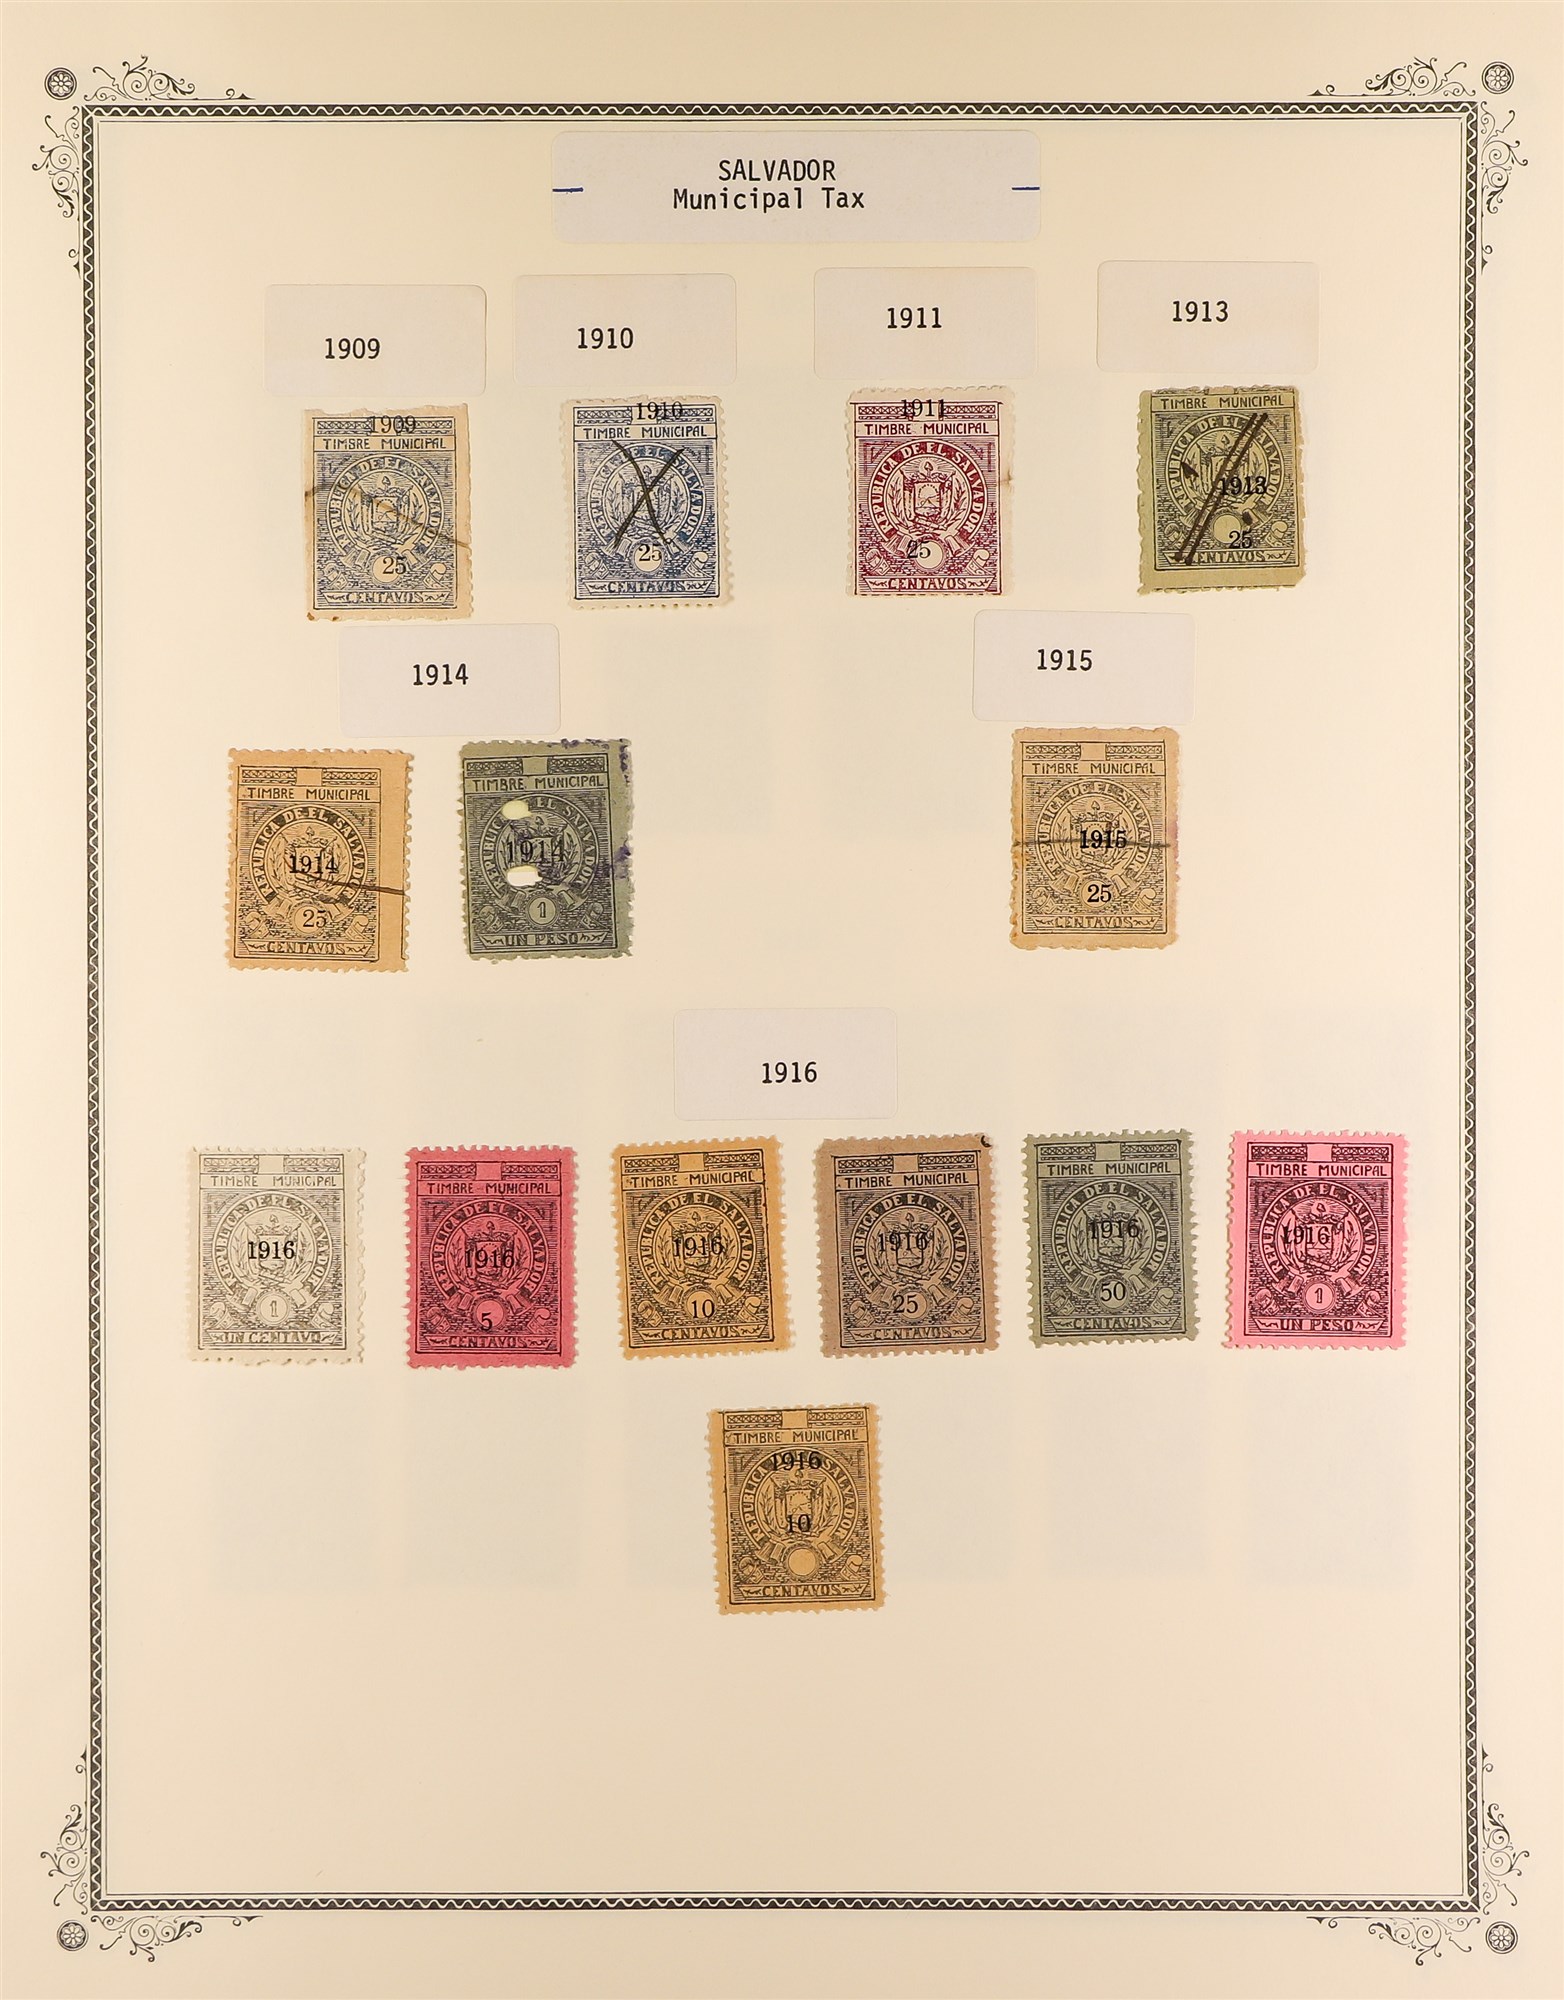 EL SALVADOR REVENUE STAMPS 1883 - 1925 mint & used collection of over 400 revenue stamps, on album - Image 22 of 27